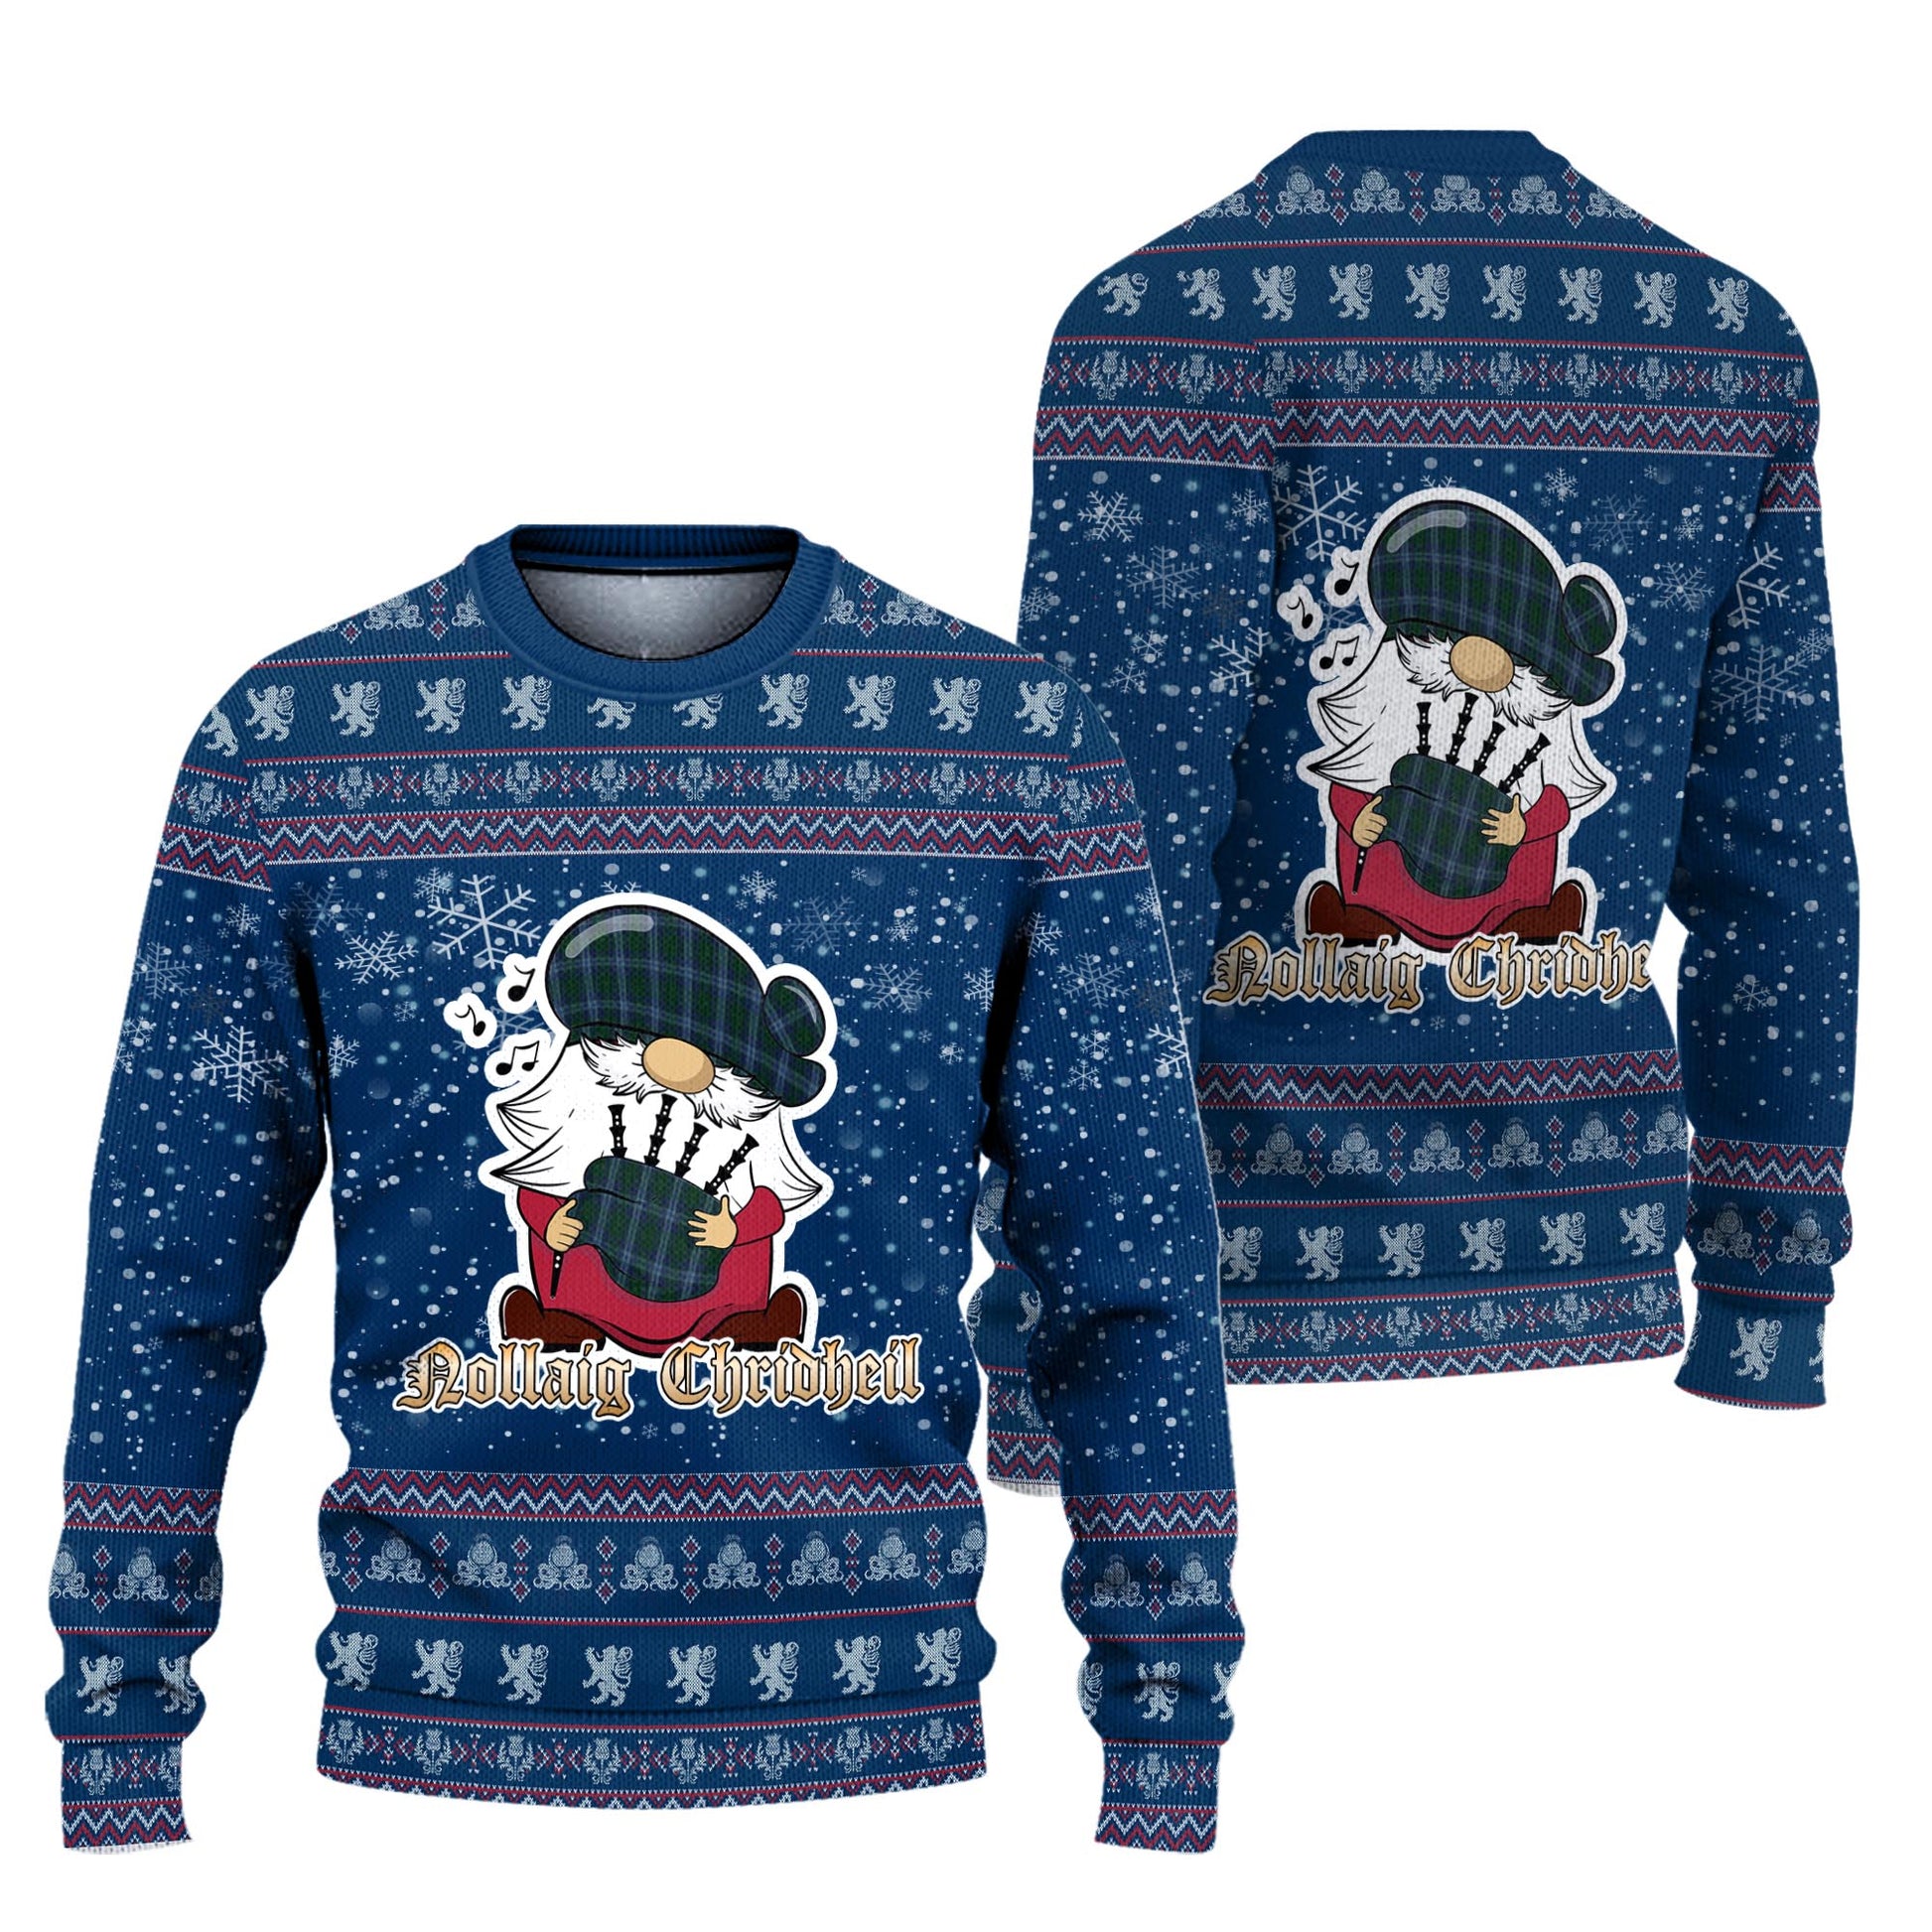 Jones of Wales Clan Christmas Family Knitted Sweater with Funny Gnome Playing Bagpipes Unisex Blue - Tartanvibesclothing